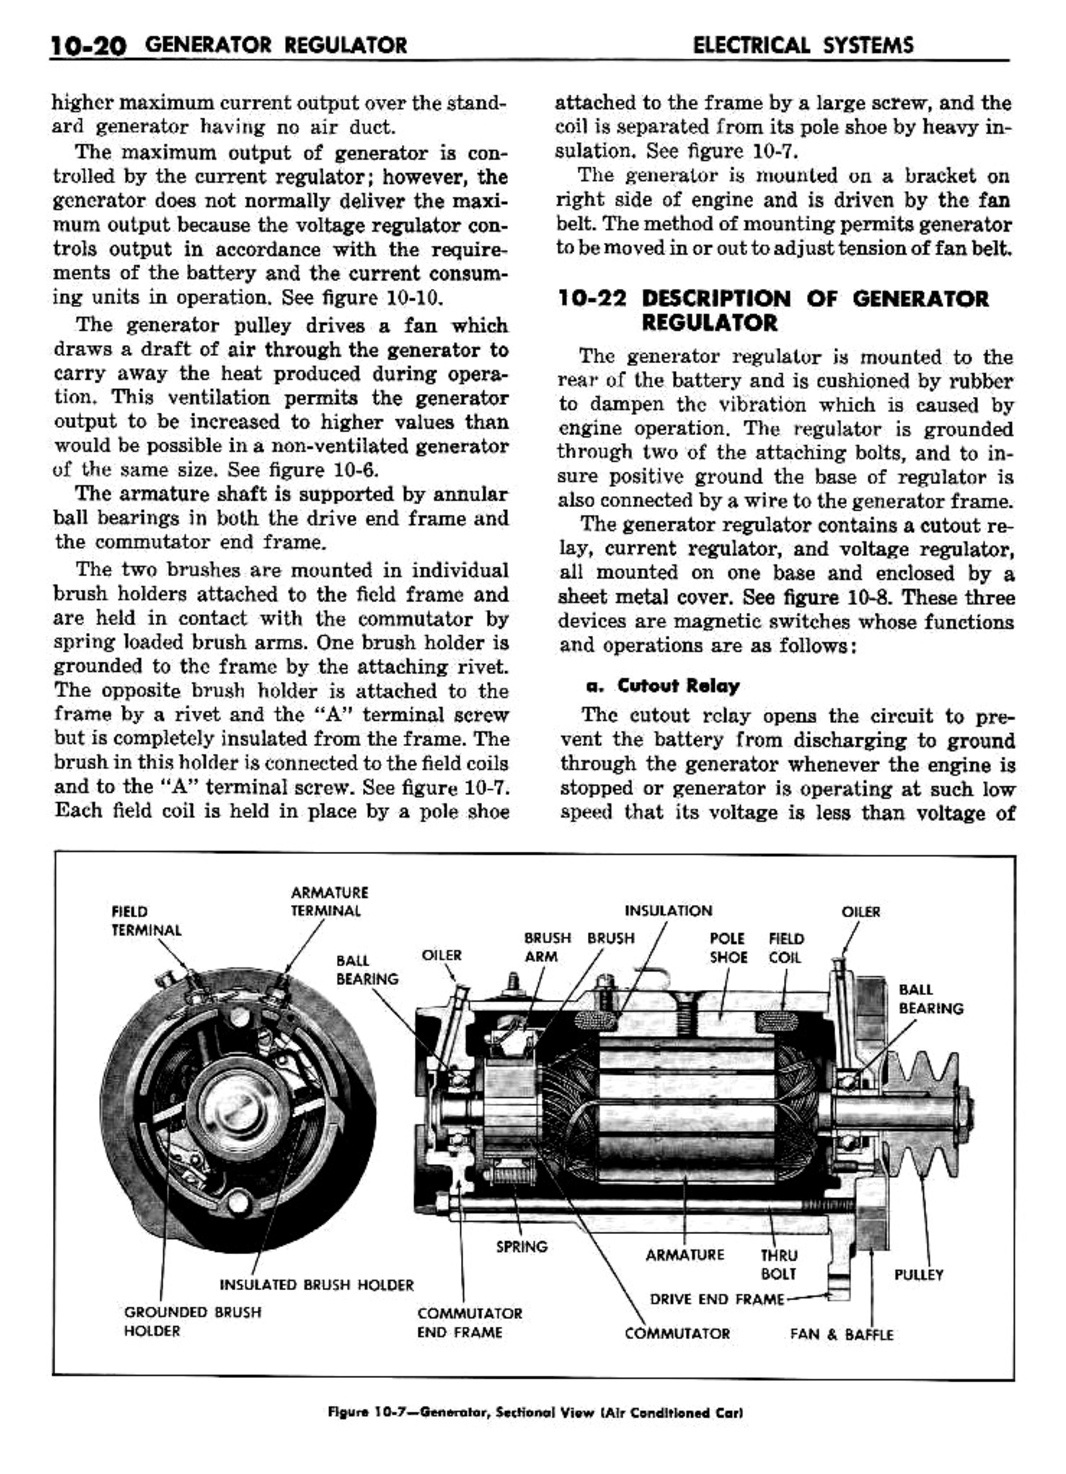 n_11 1960 Buick Shop Manual - Electrical Systems-020-020.jpg